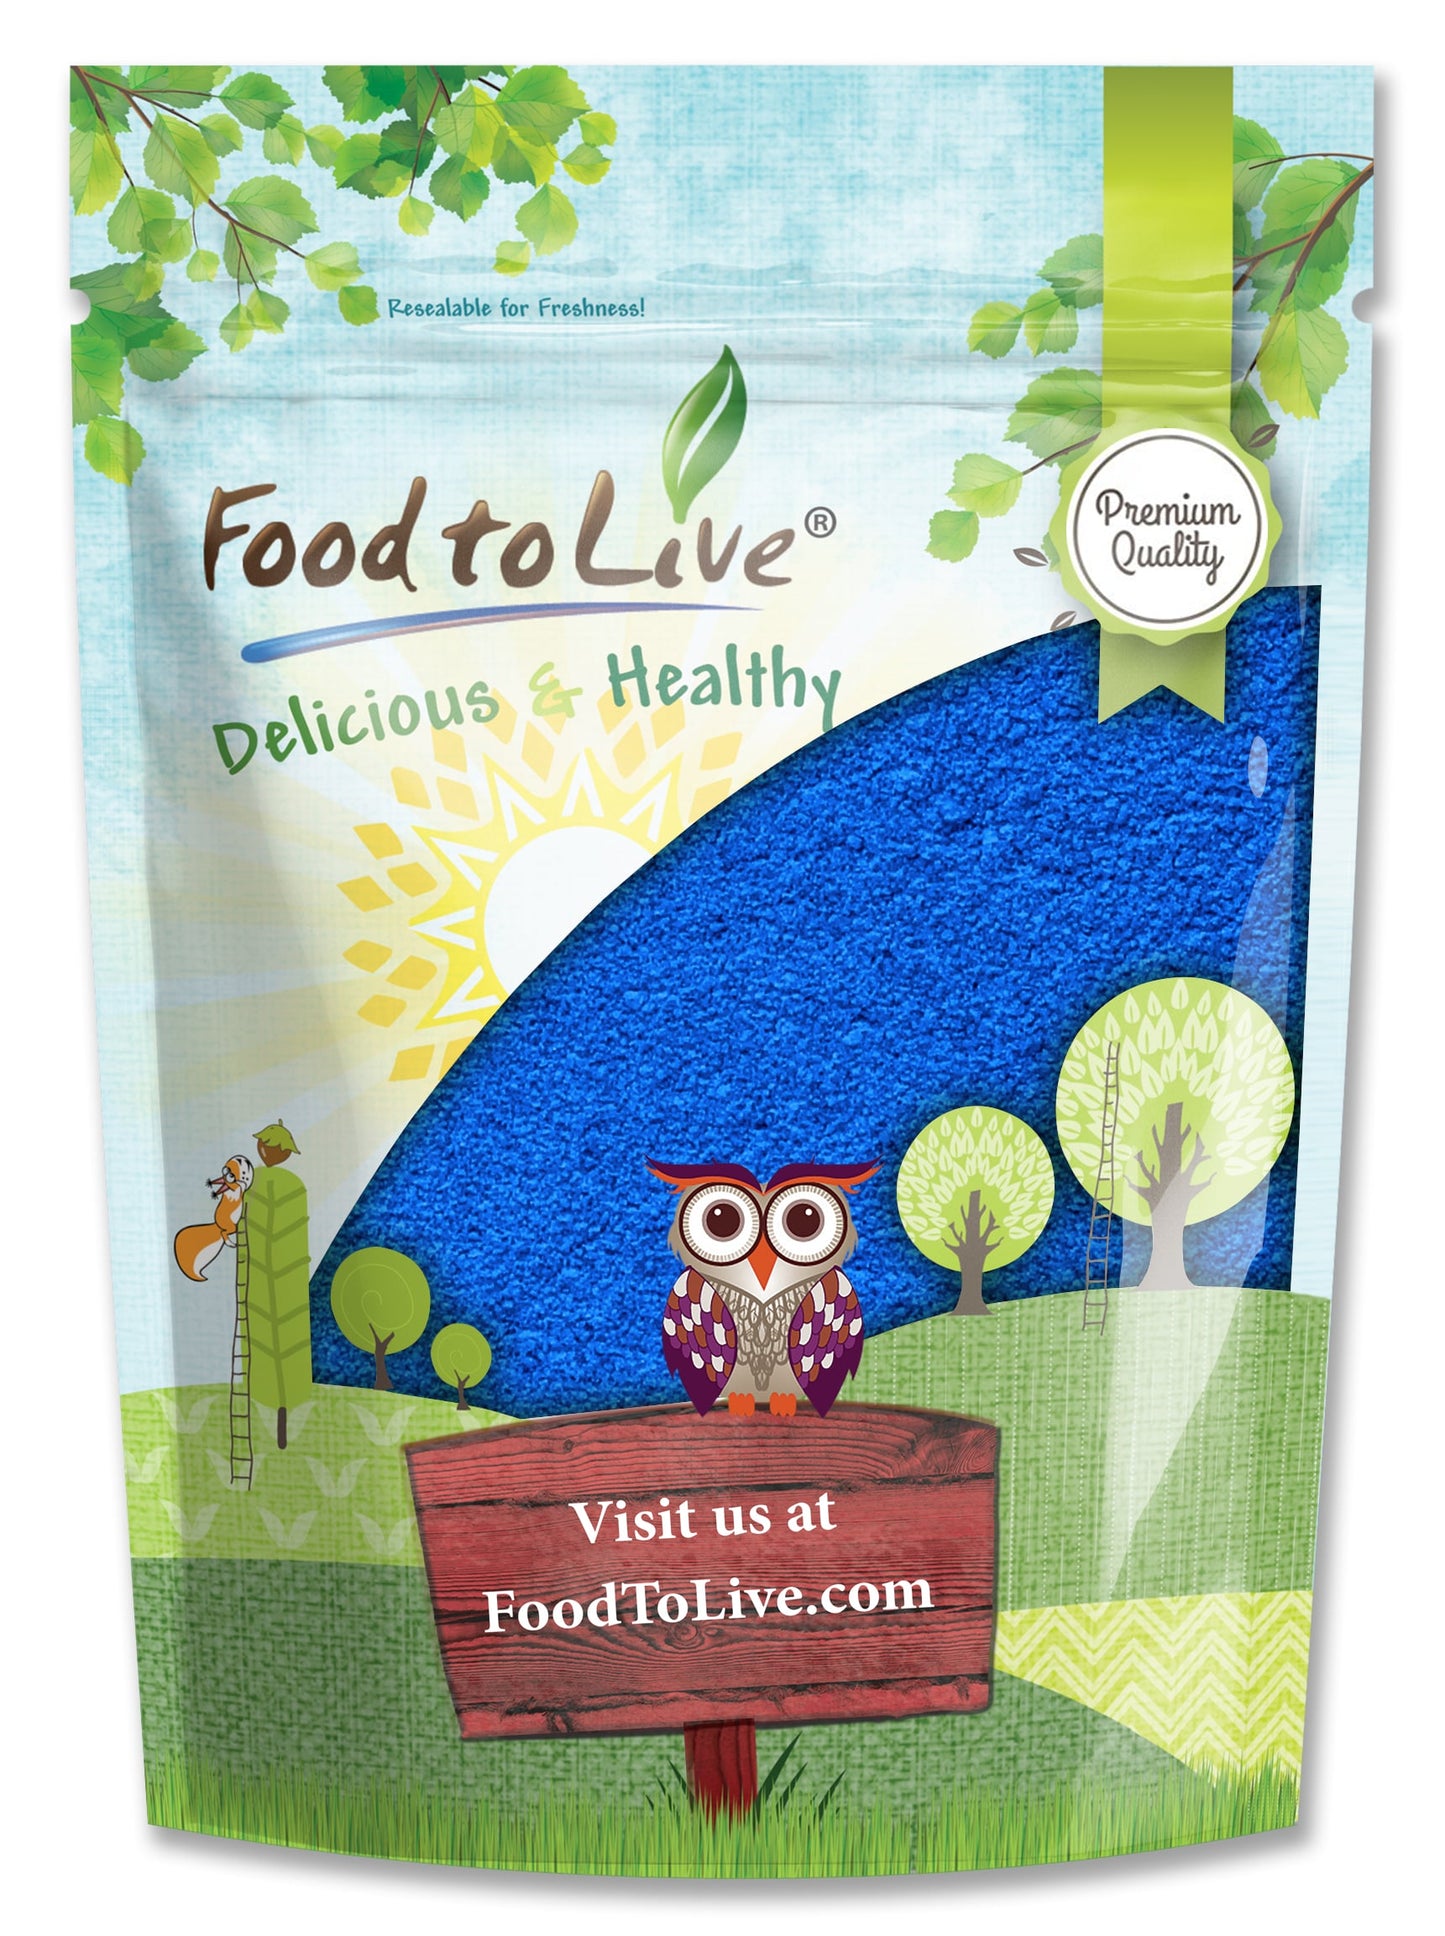 Blue Spirulina Powder - Pure Raw Blue-Green Algae Extract, Kosher, Vegan, Non-Irradiated, Rich in Phycocyanin, Great for Juices, Smoothies, Shakes, Drinks, and Food Coloring, Bulk - by Food to Live